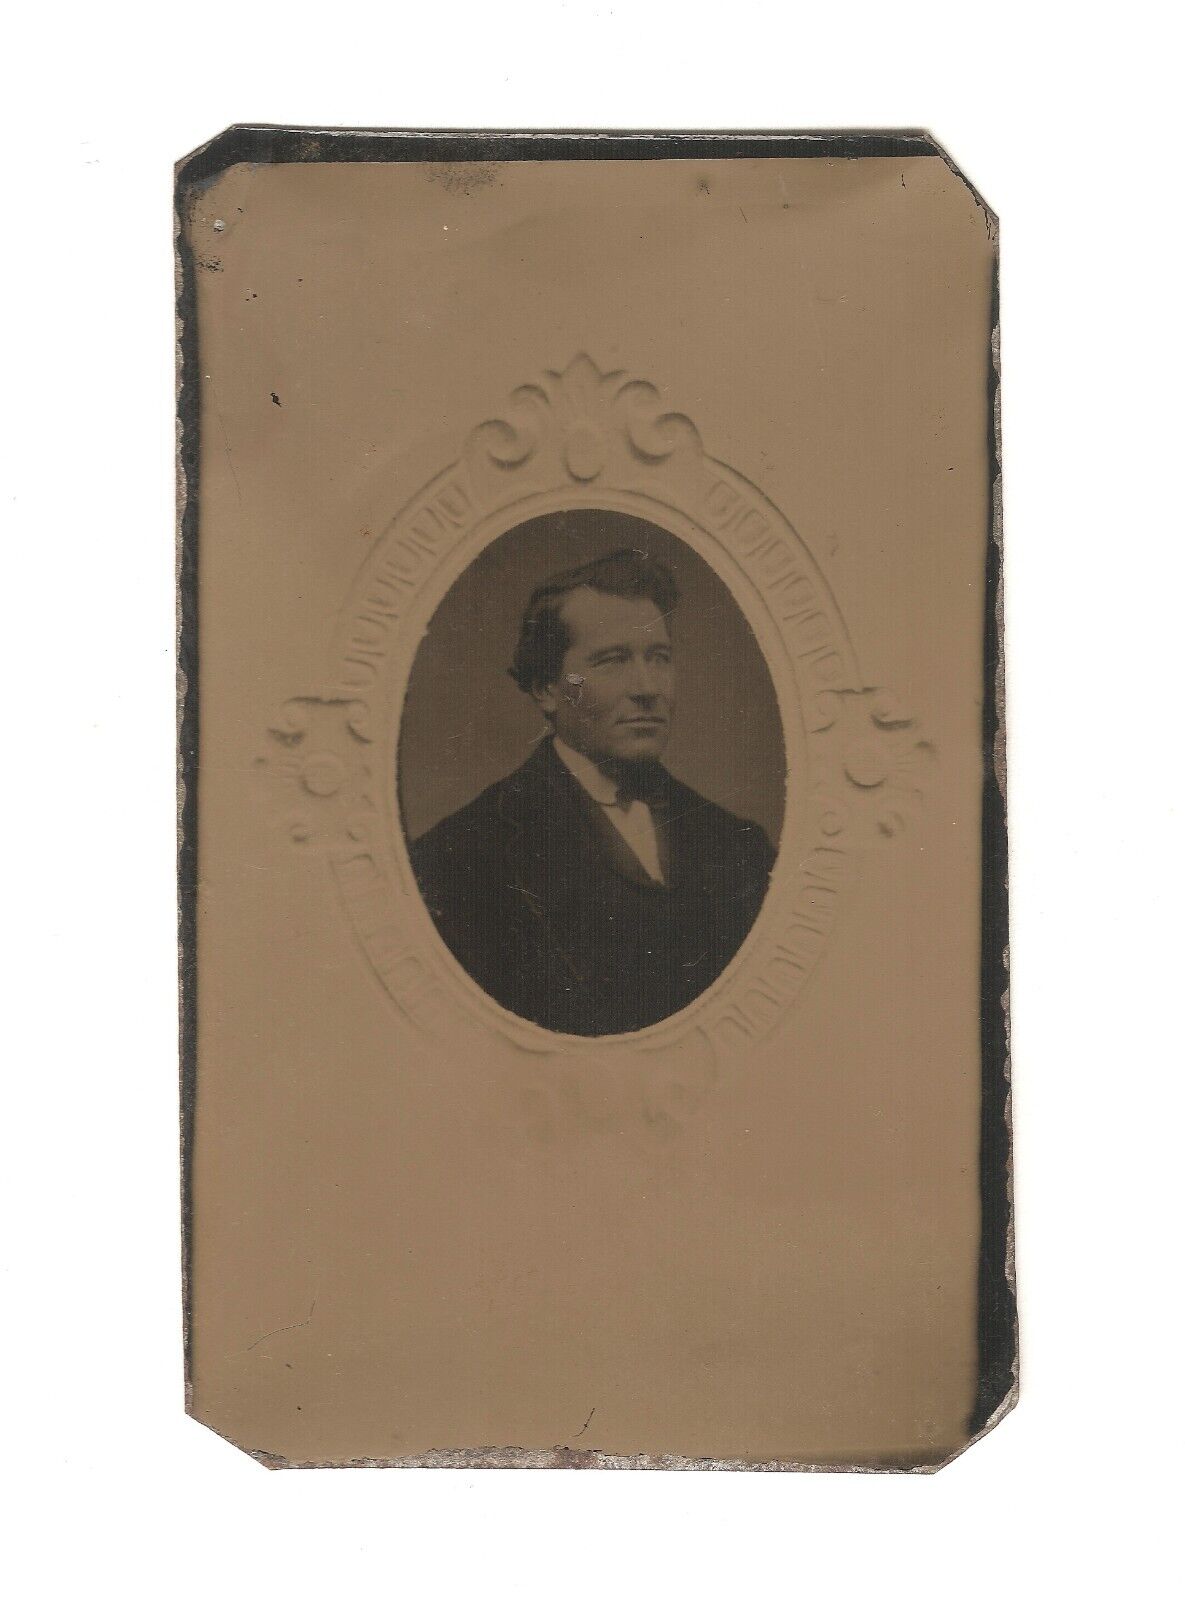 Original Antique Tintype Copy of a Young Man from an Old Framed Tintype Photo